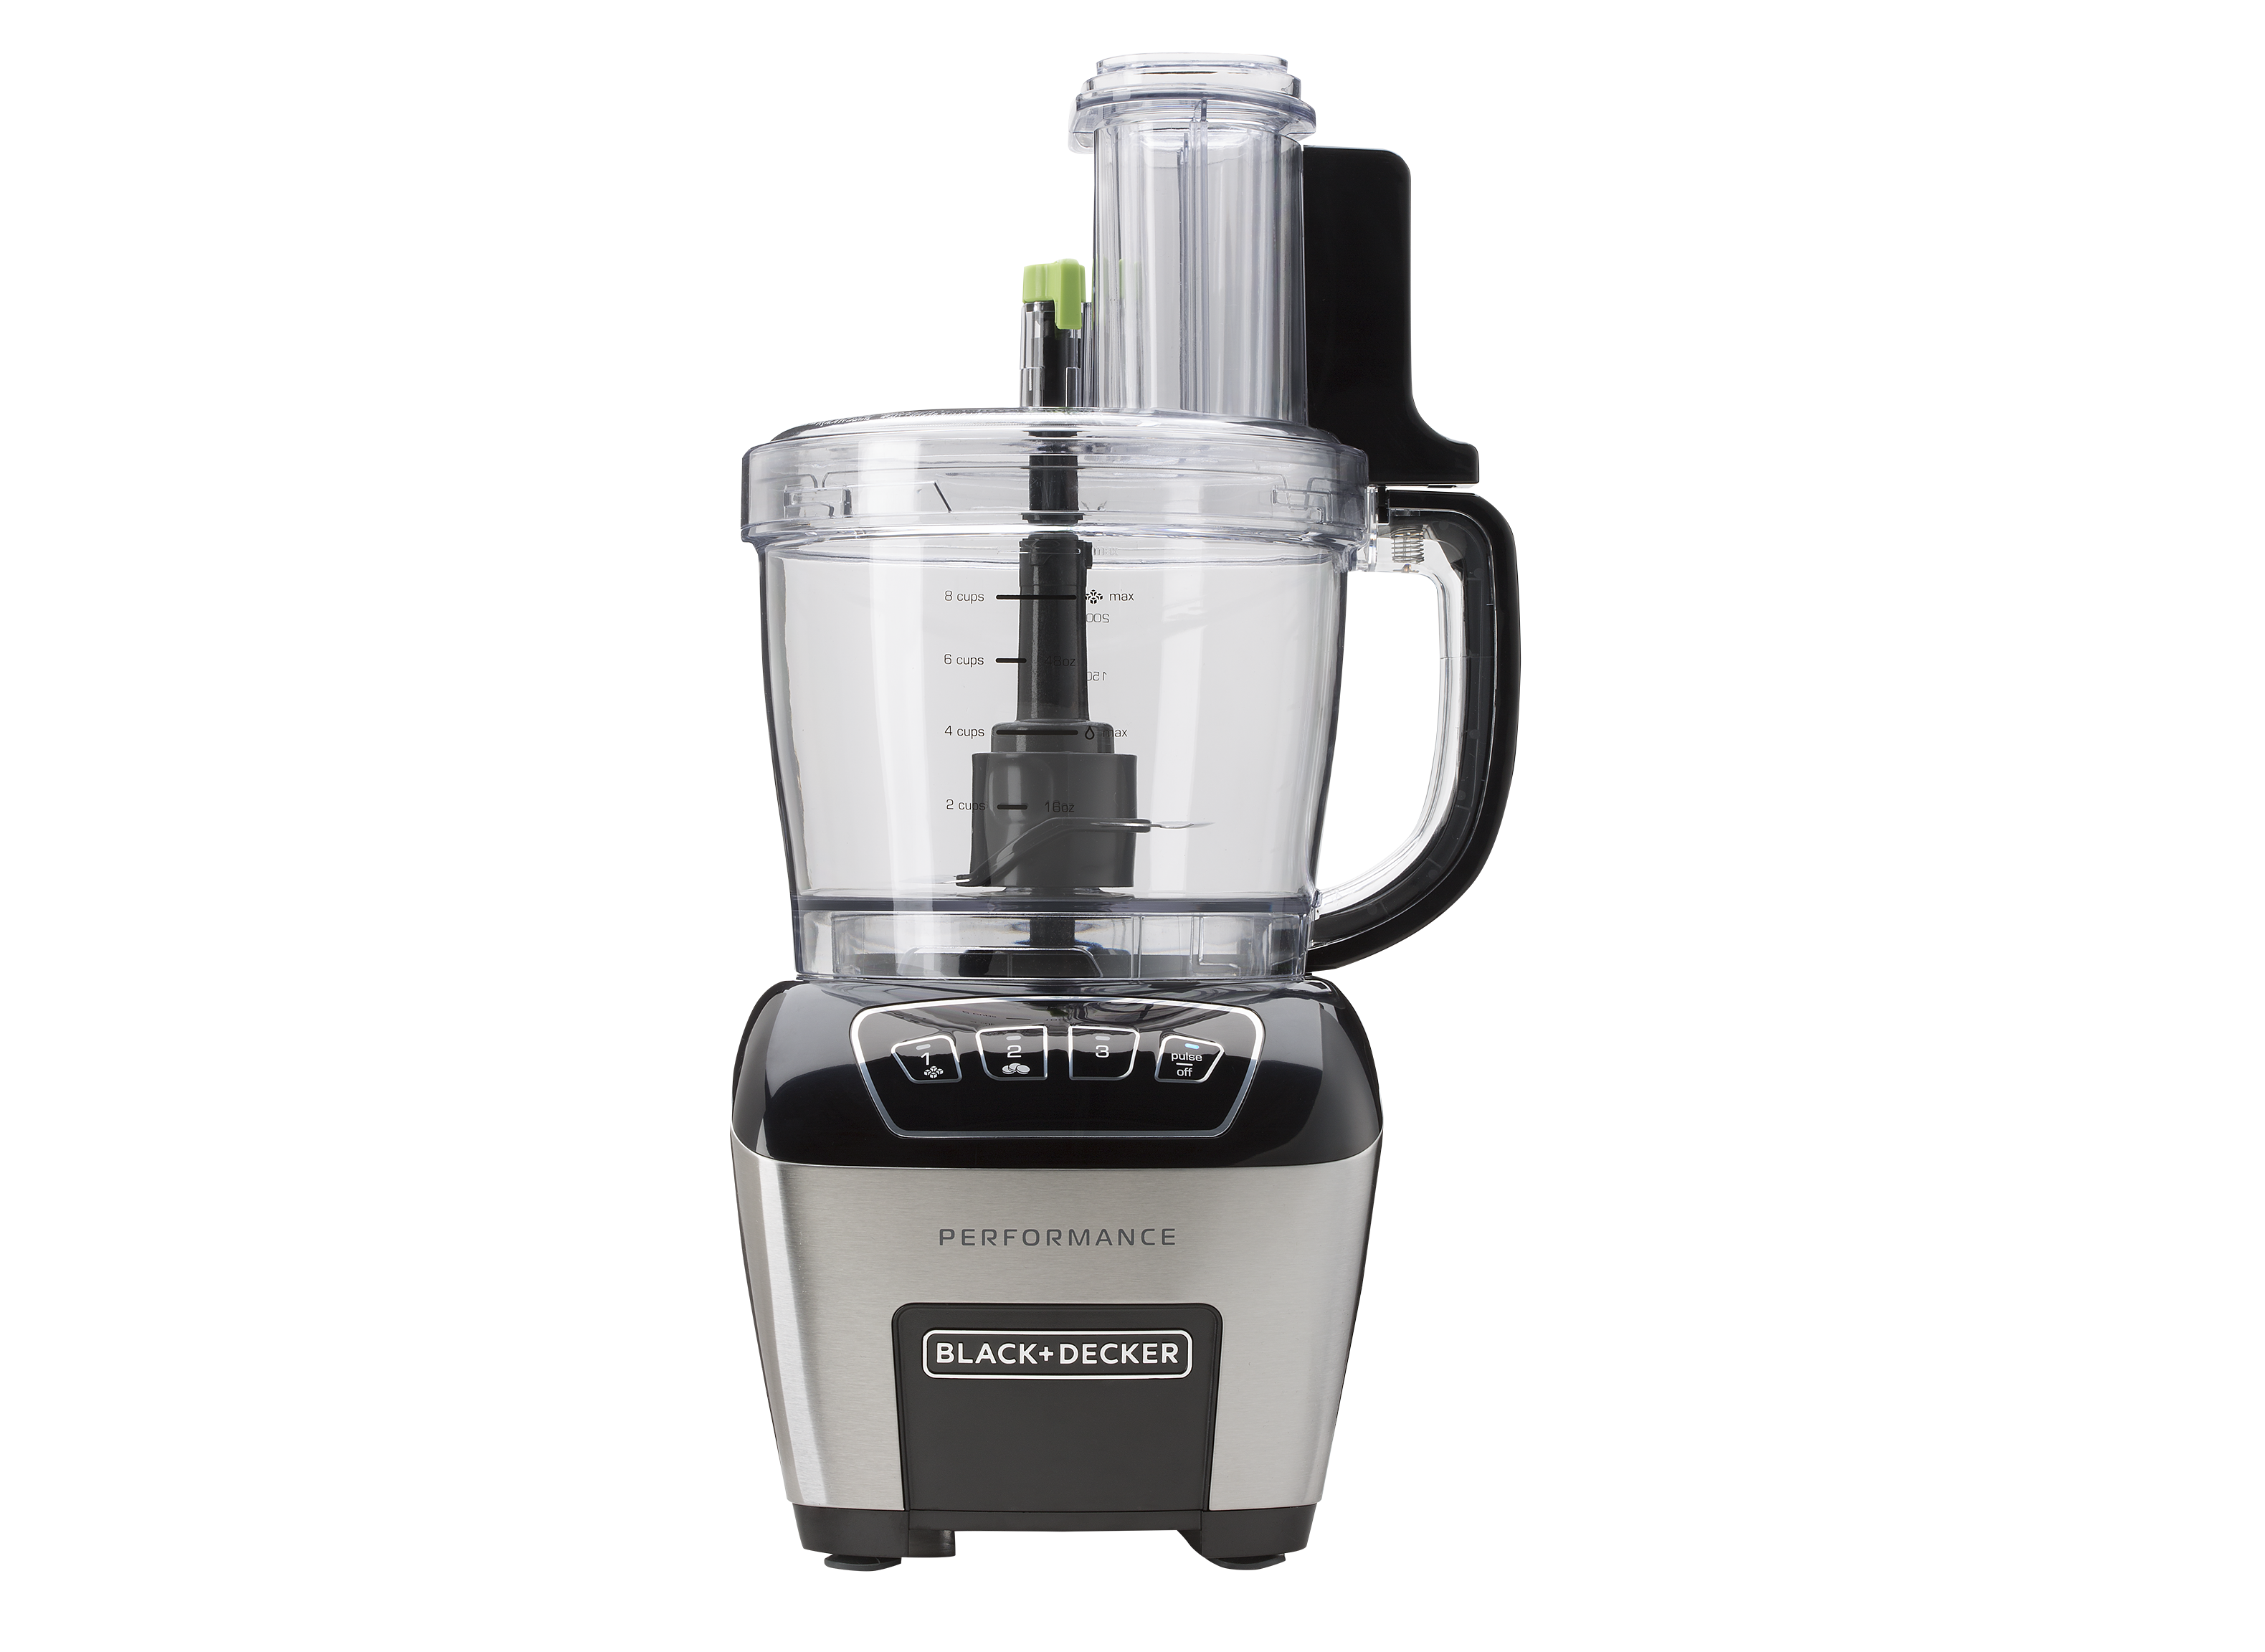 https://crdms.images.consumerreports.org/prod/products/cr/models/379152-foodprocessors-blackdecker-performancedicingfp6010b.png